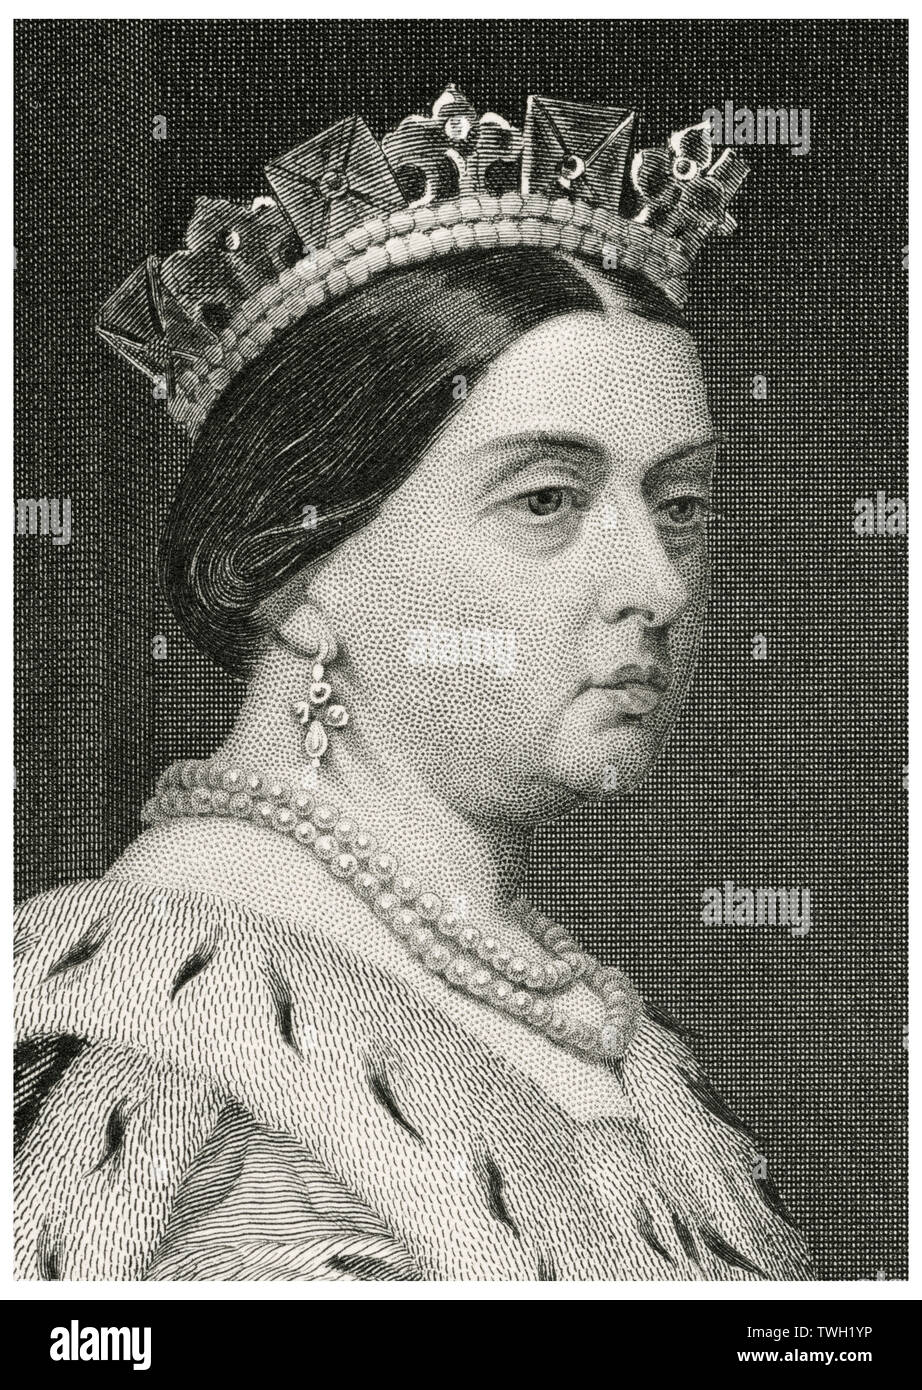 Queen Victoria (1819-1901), Queen of the United Kingdom of Great Britain and Ireland, Head and Shoulders Portrait, Steel Engraving, Portrait Gallery of Eminent Men and Women of Europe and America by Evert A. Duyckinck, Published by Henry J. Johnson, Johnson, Wilson & Company, New York, 1873 Stock Photo